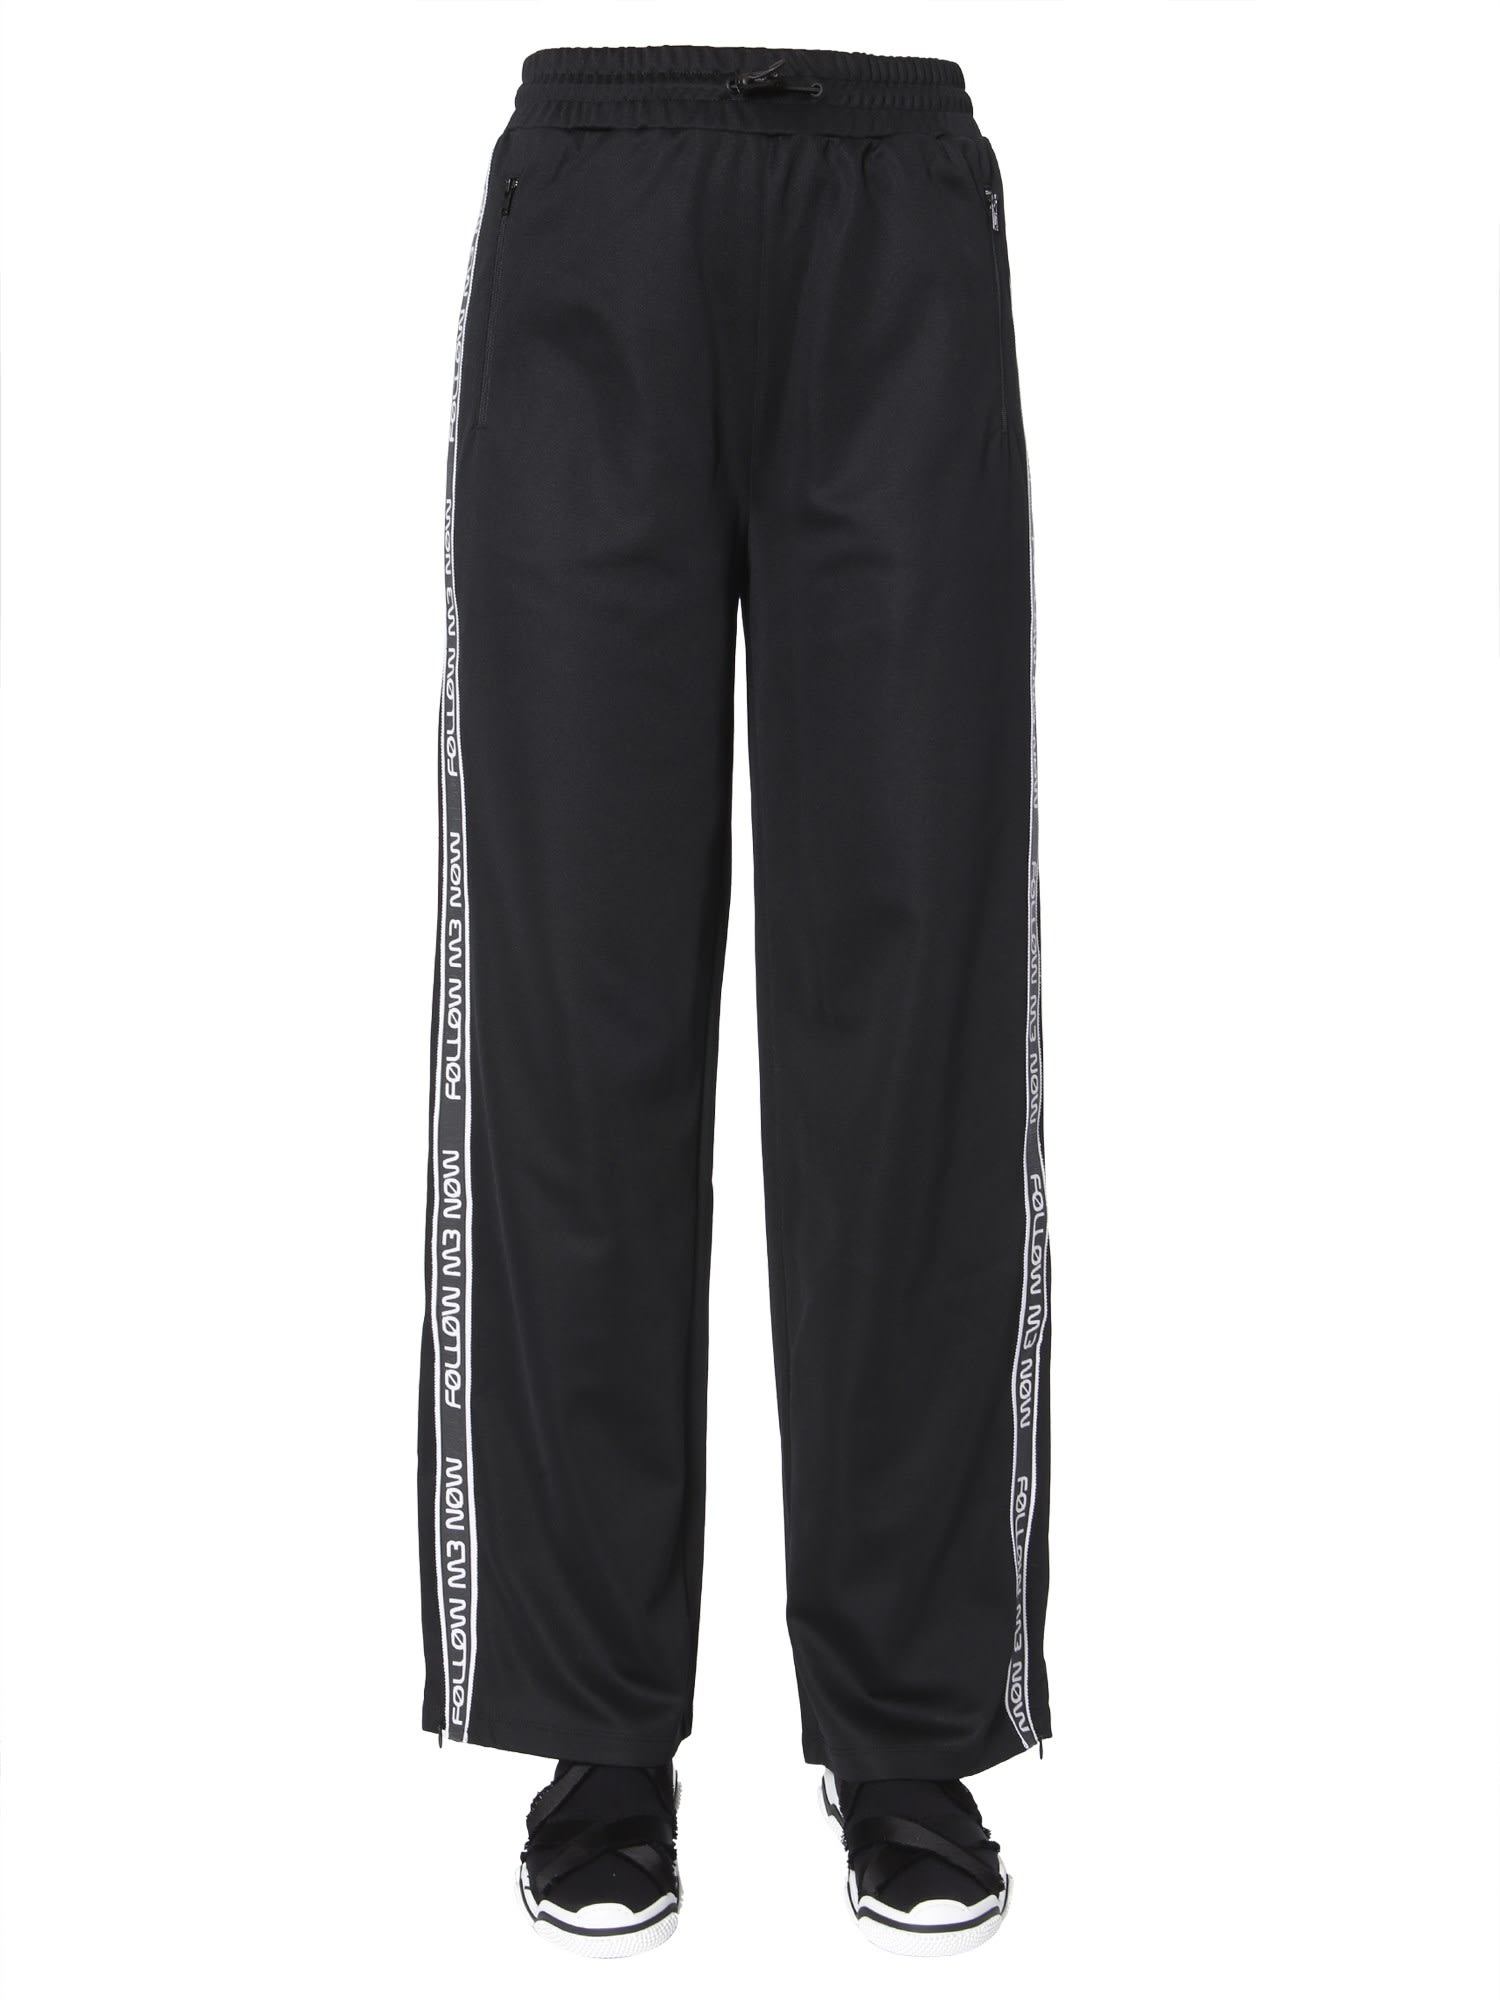 RED Valentino Jersey Pants